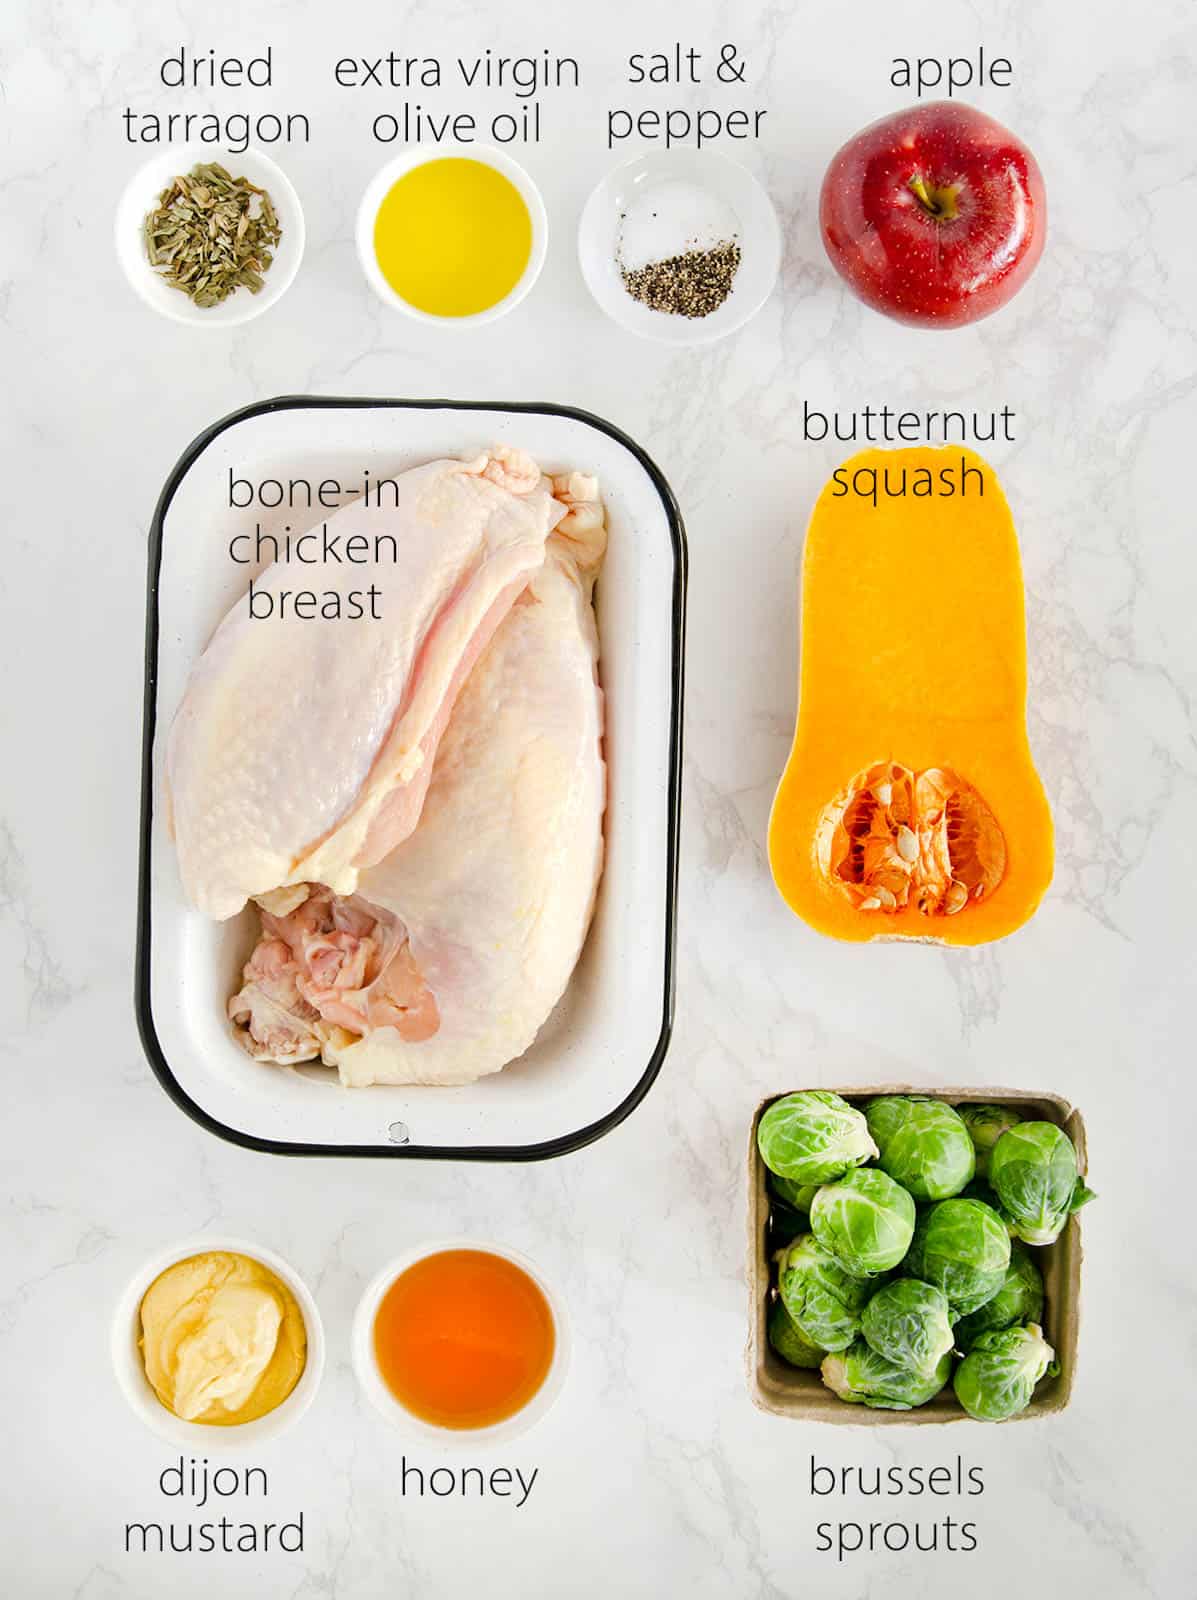 Small dishes with ingredients for honey mustard chicken including tarragon, apple, squash, and Brussels sprouts.